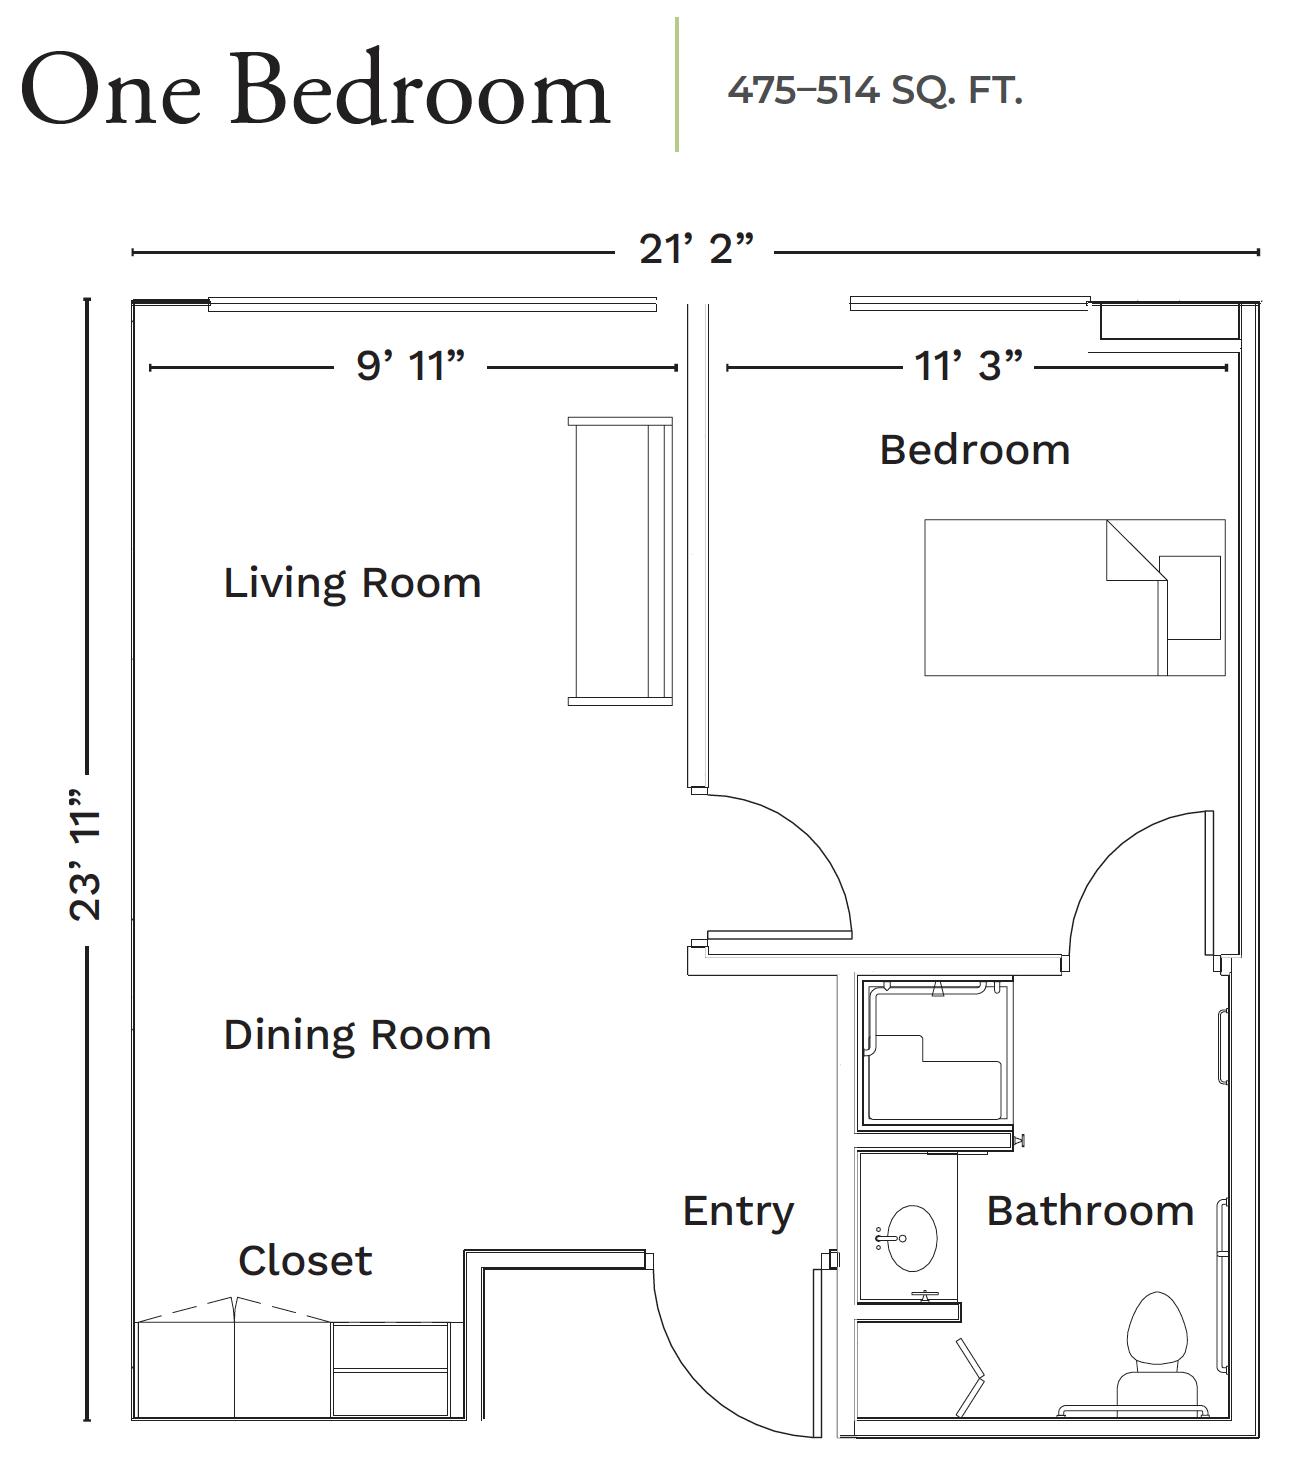 One-bedroom apartment floor plan showing living room, dining room, bedroom, bathroom, and closet